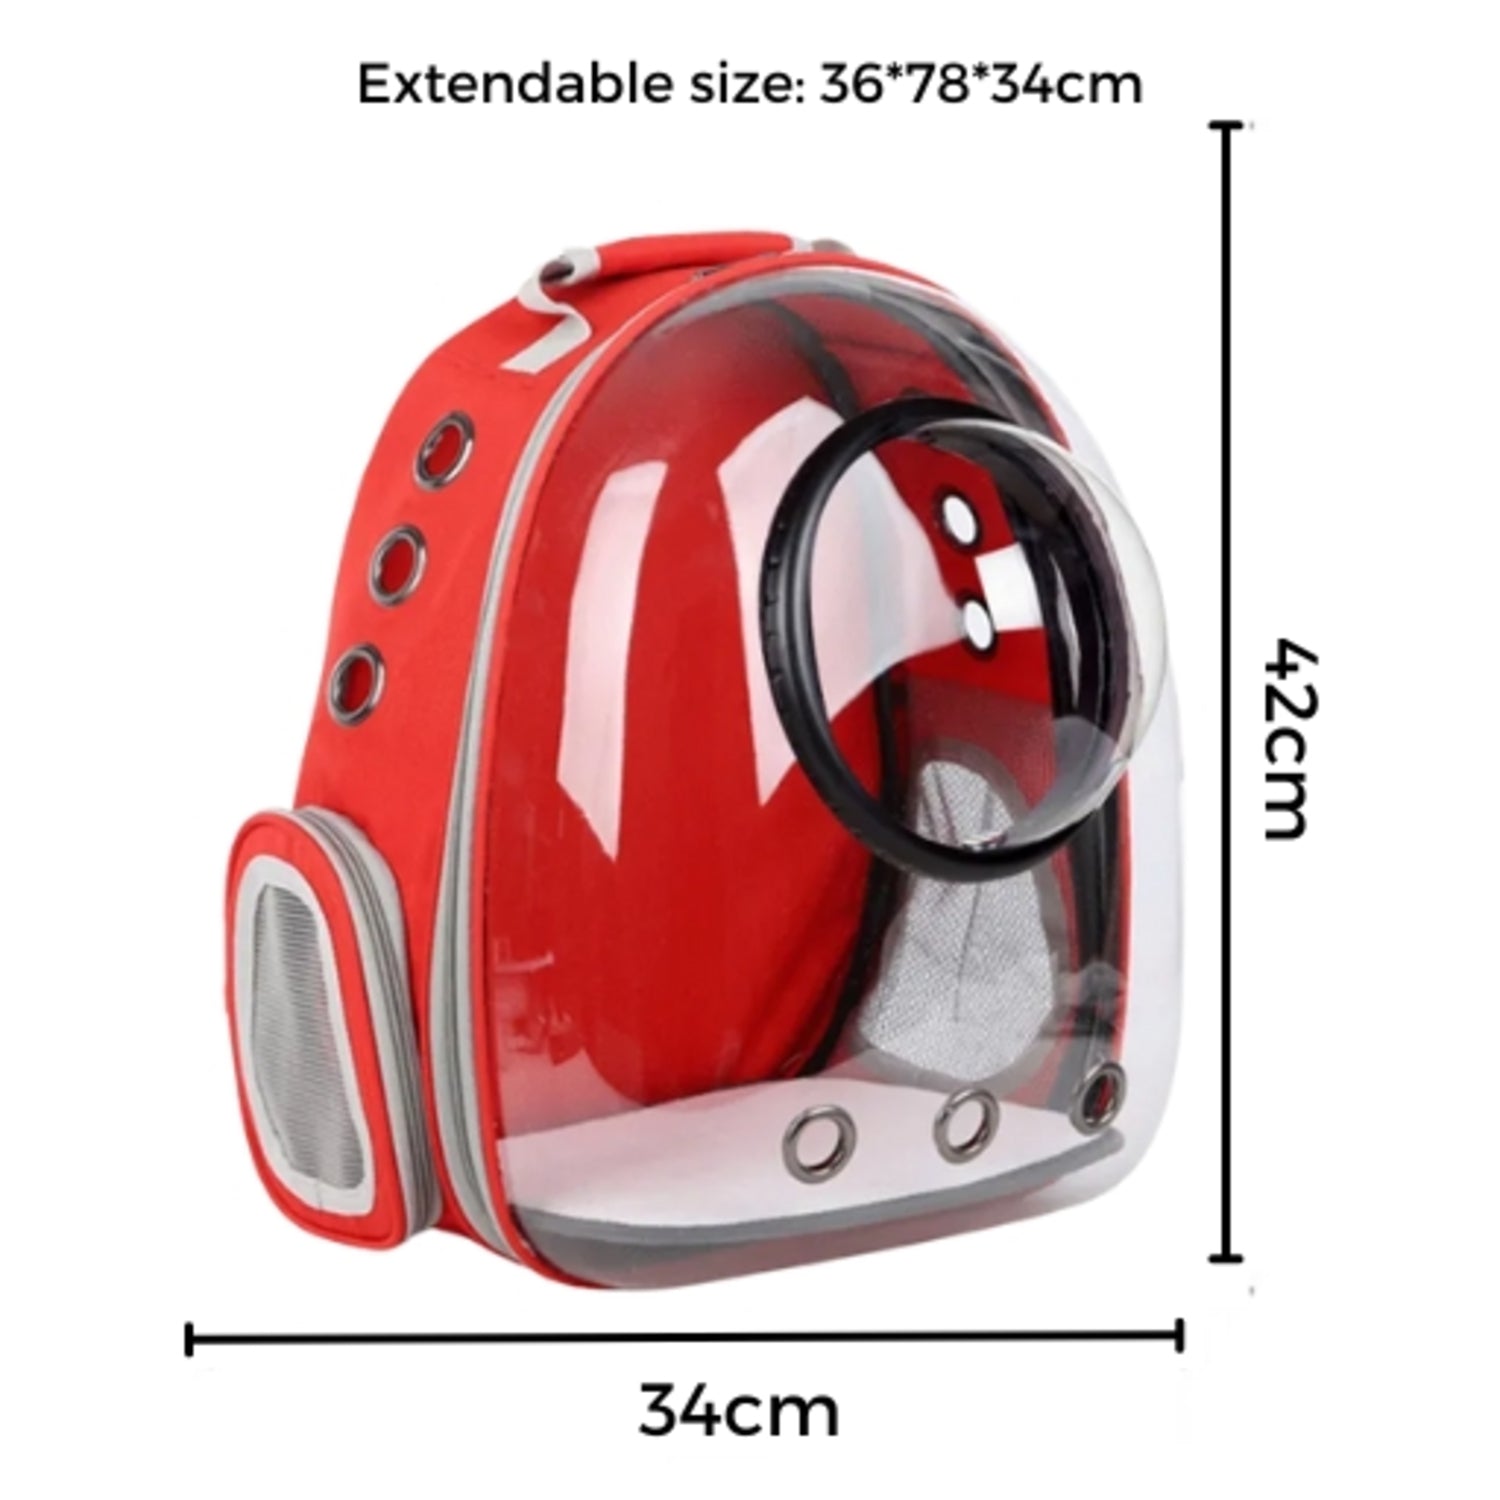 Floofi Expandable Space Capsule Backpack - Model 2 (Red)